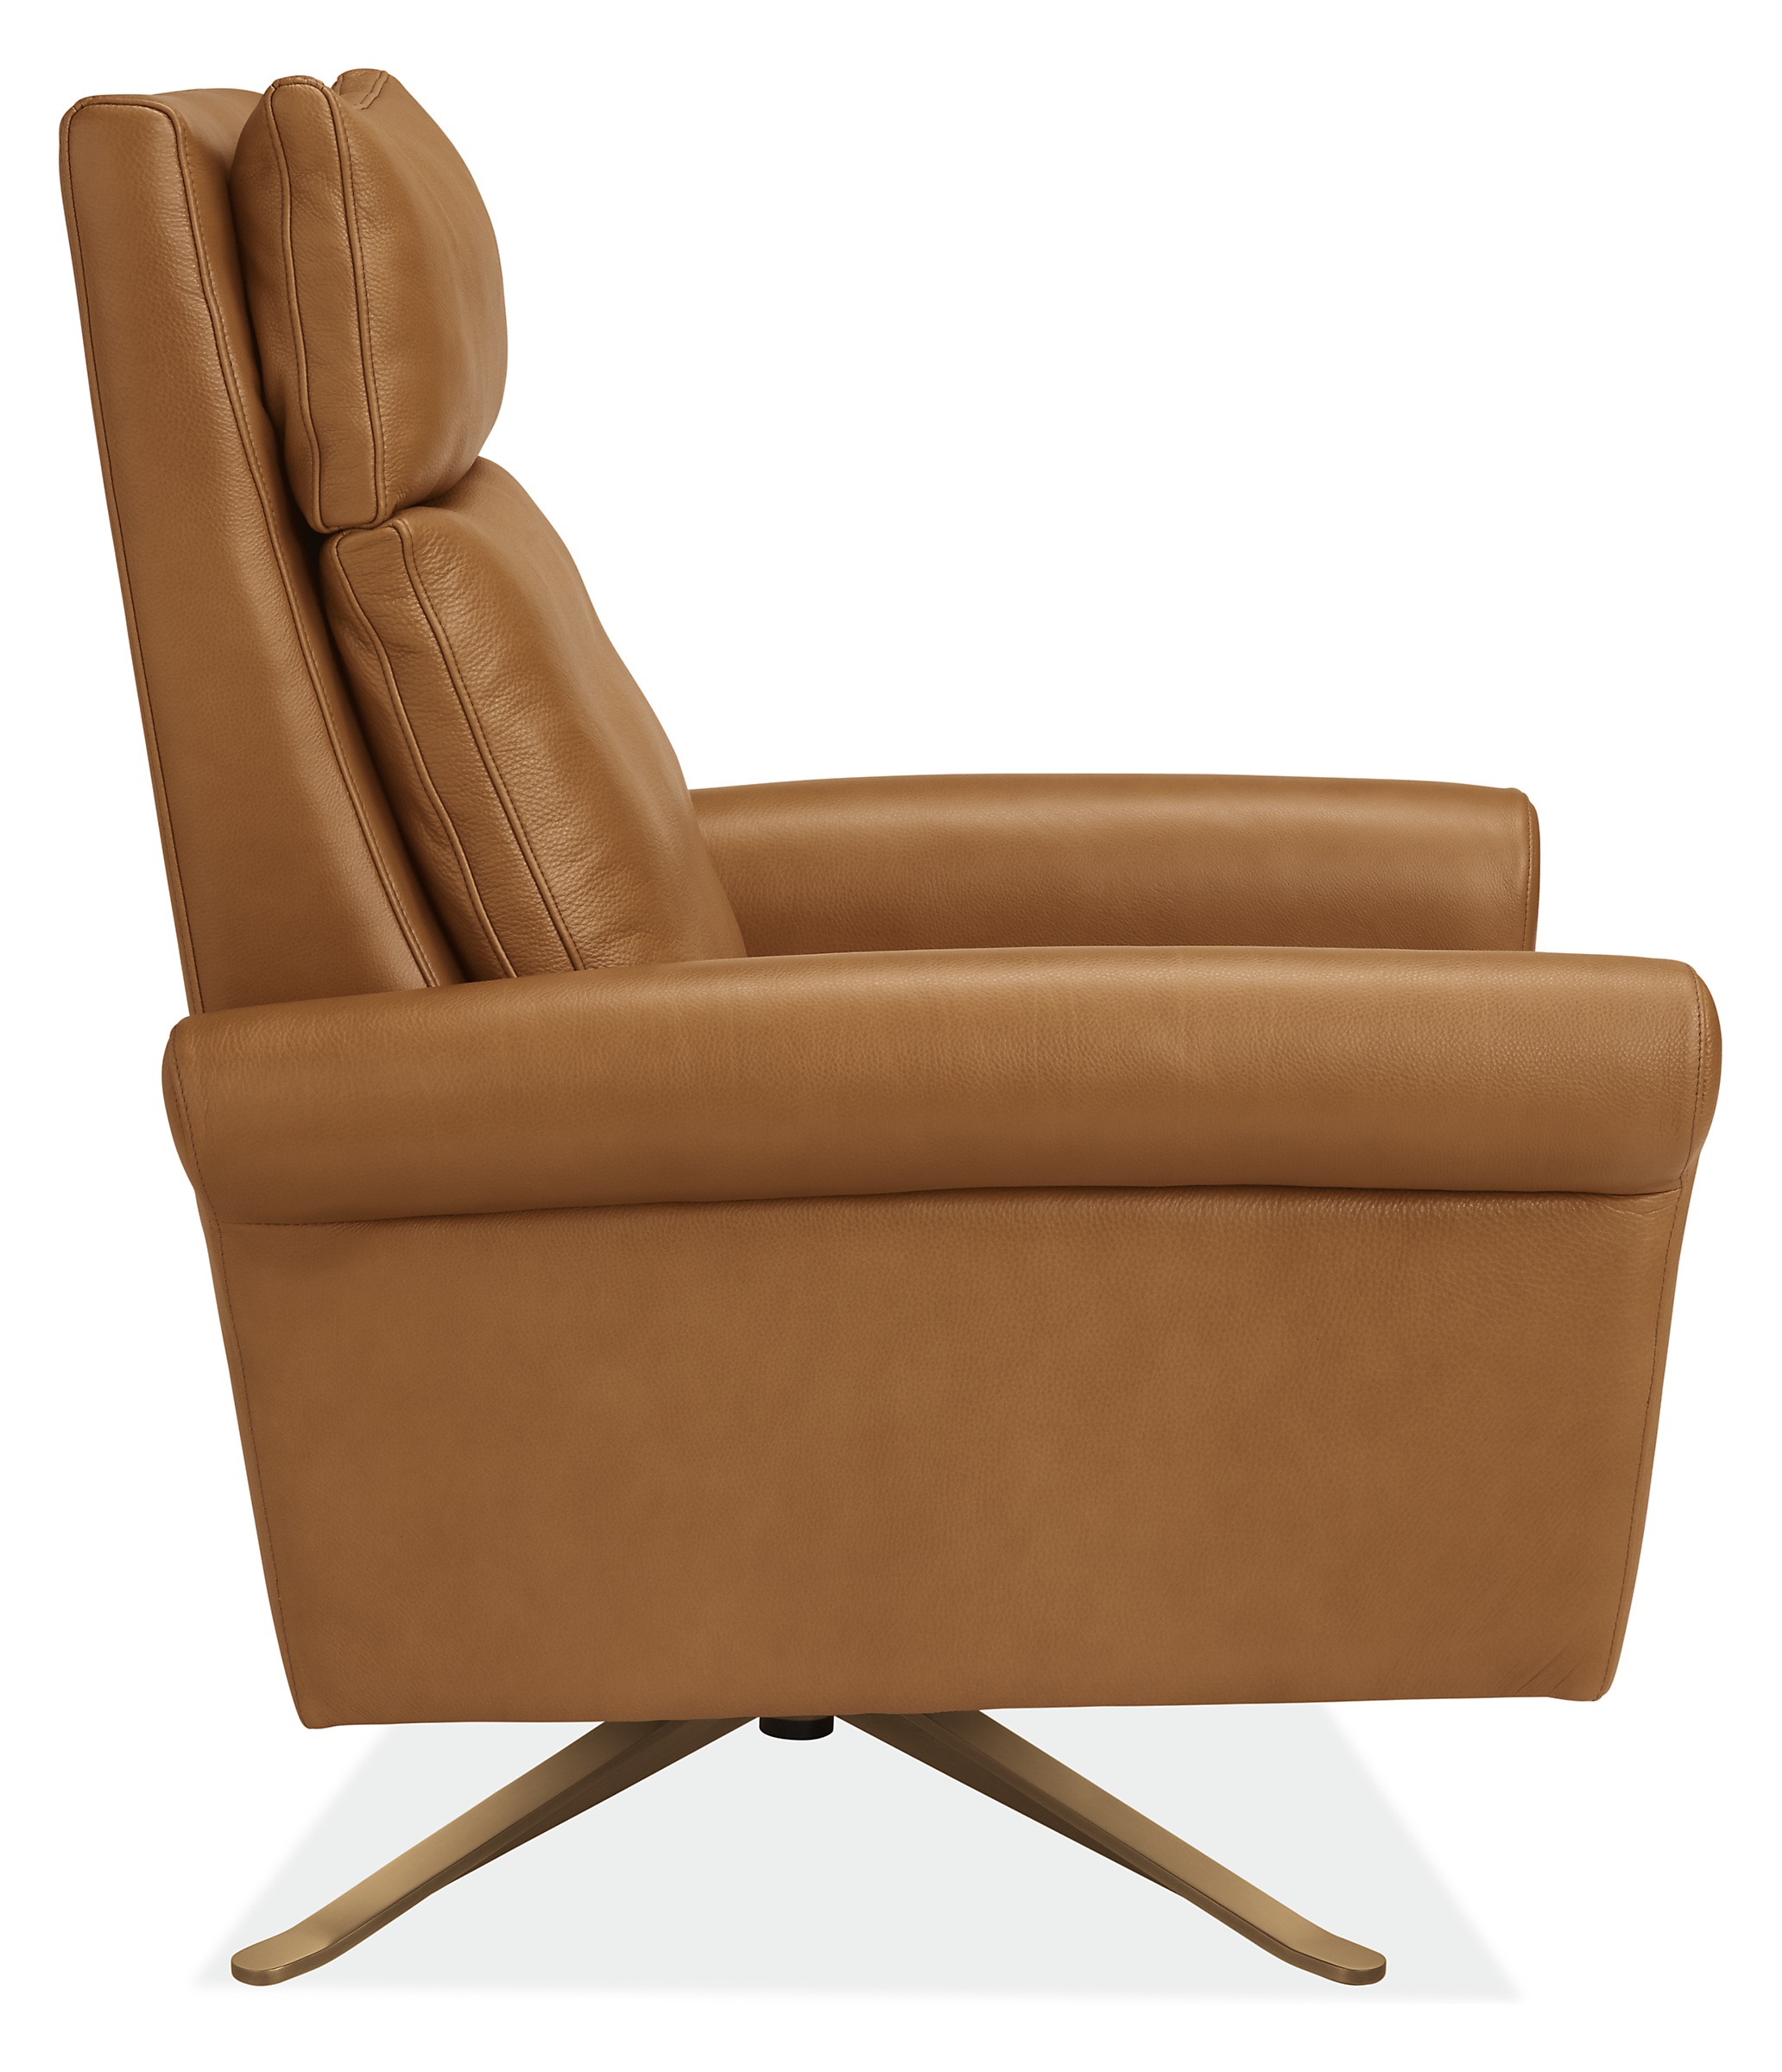 Side view of Isaac Select Recliner Rolled-Arm in Lecco Leather with Metal Base.